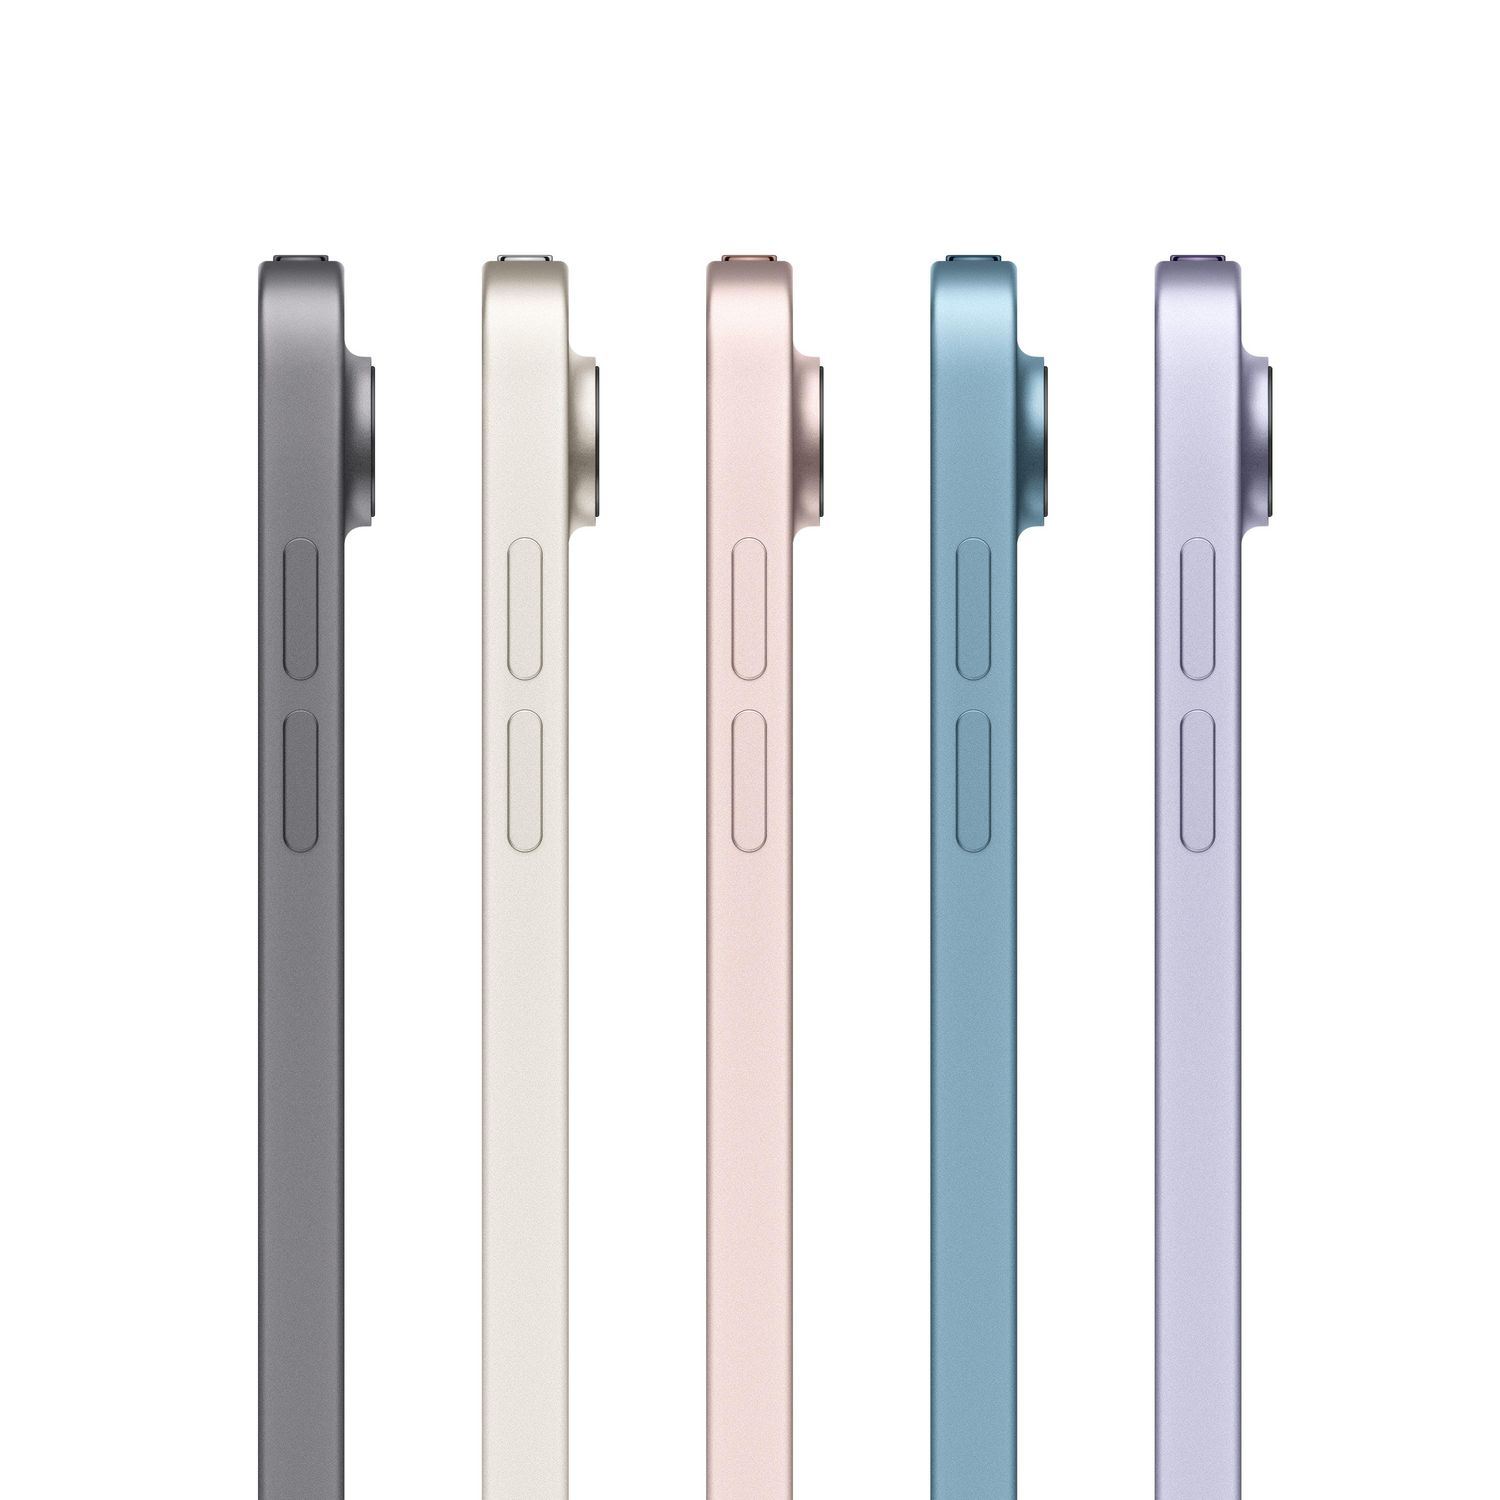 iPad Air (5th gen) 256g, Light. Bright. Full of might. Supercharged by 